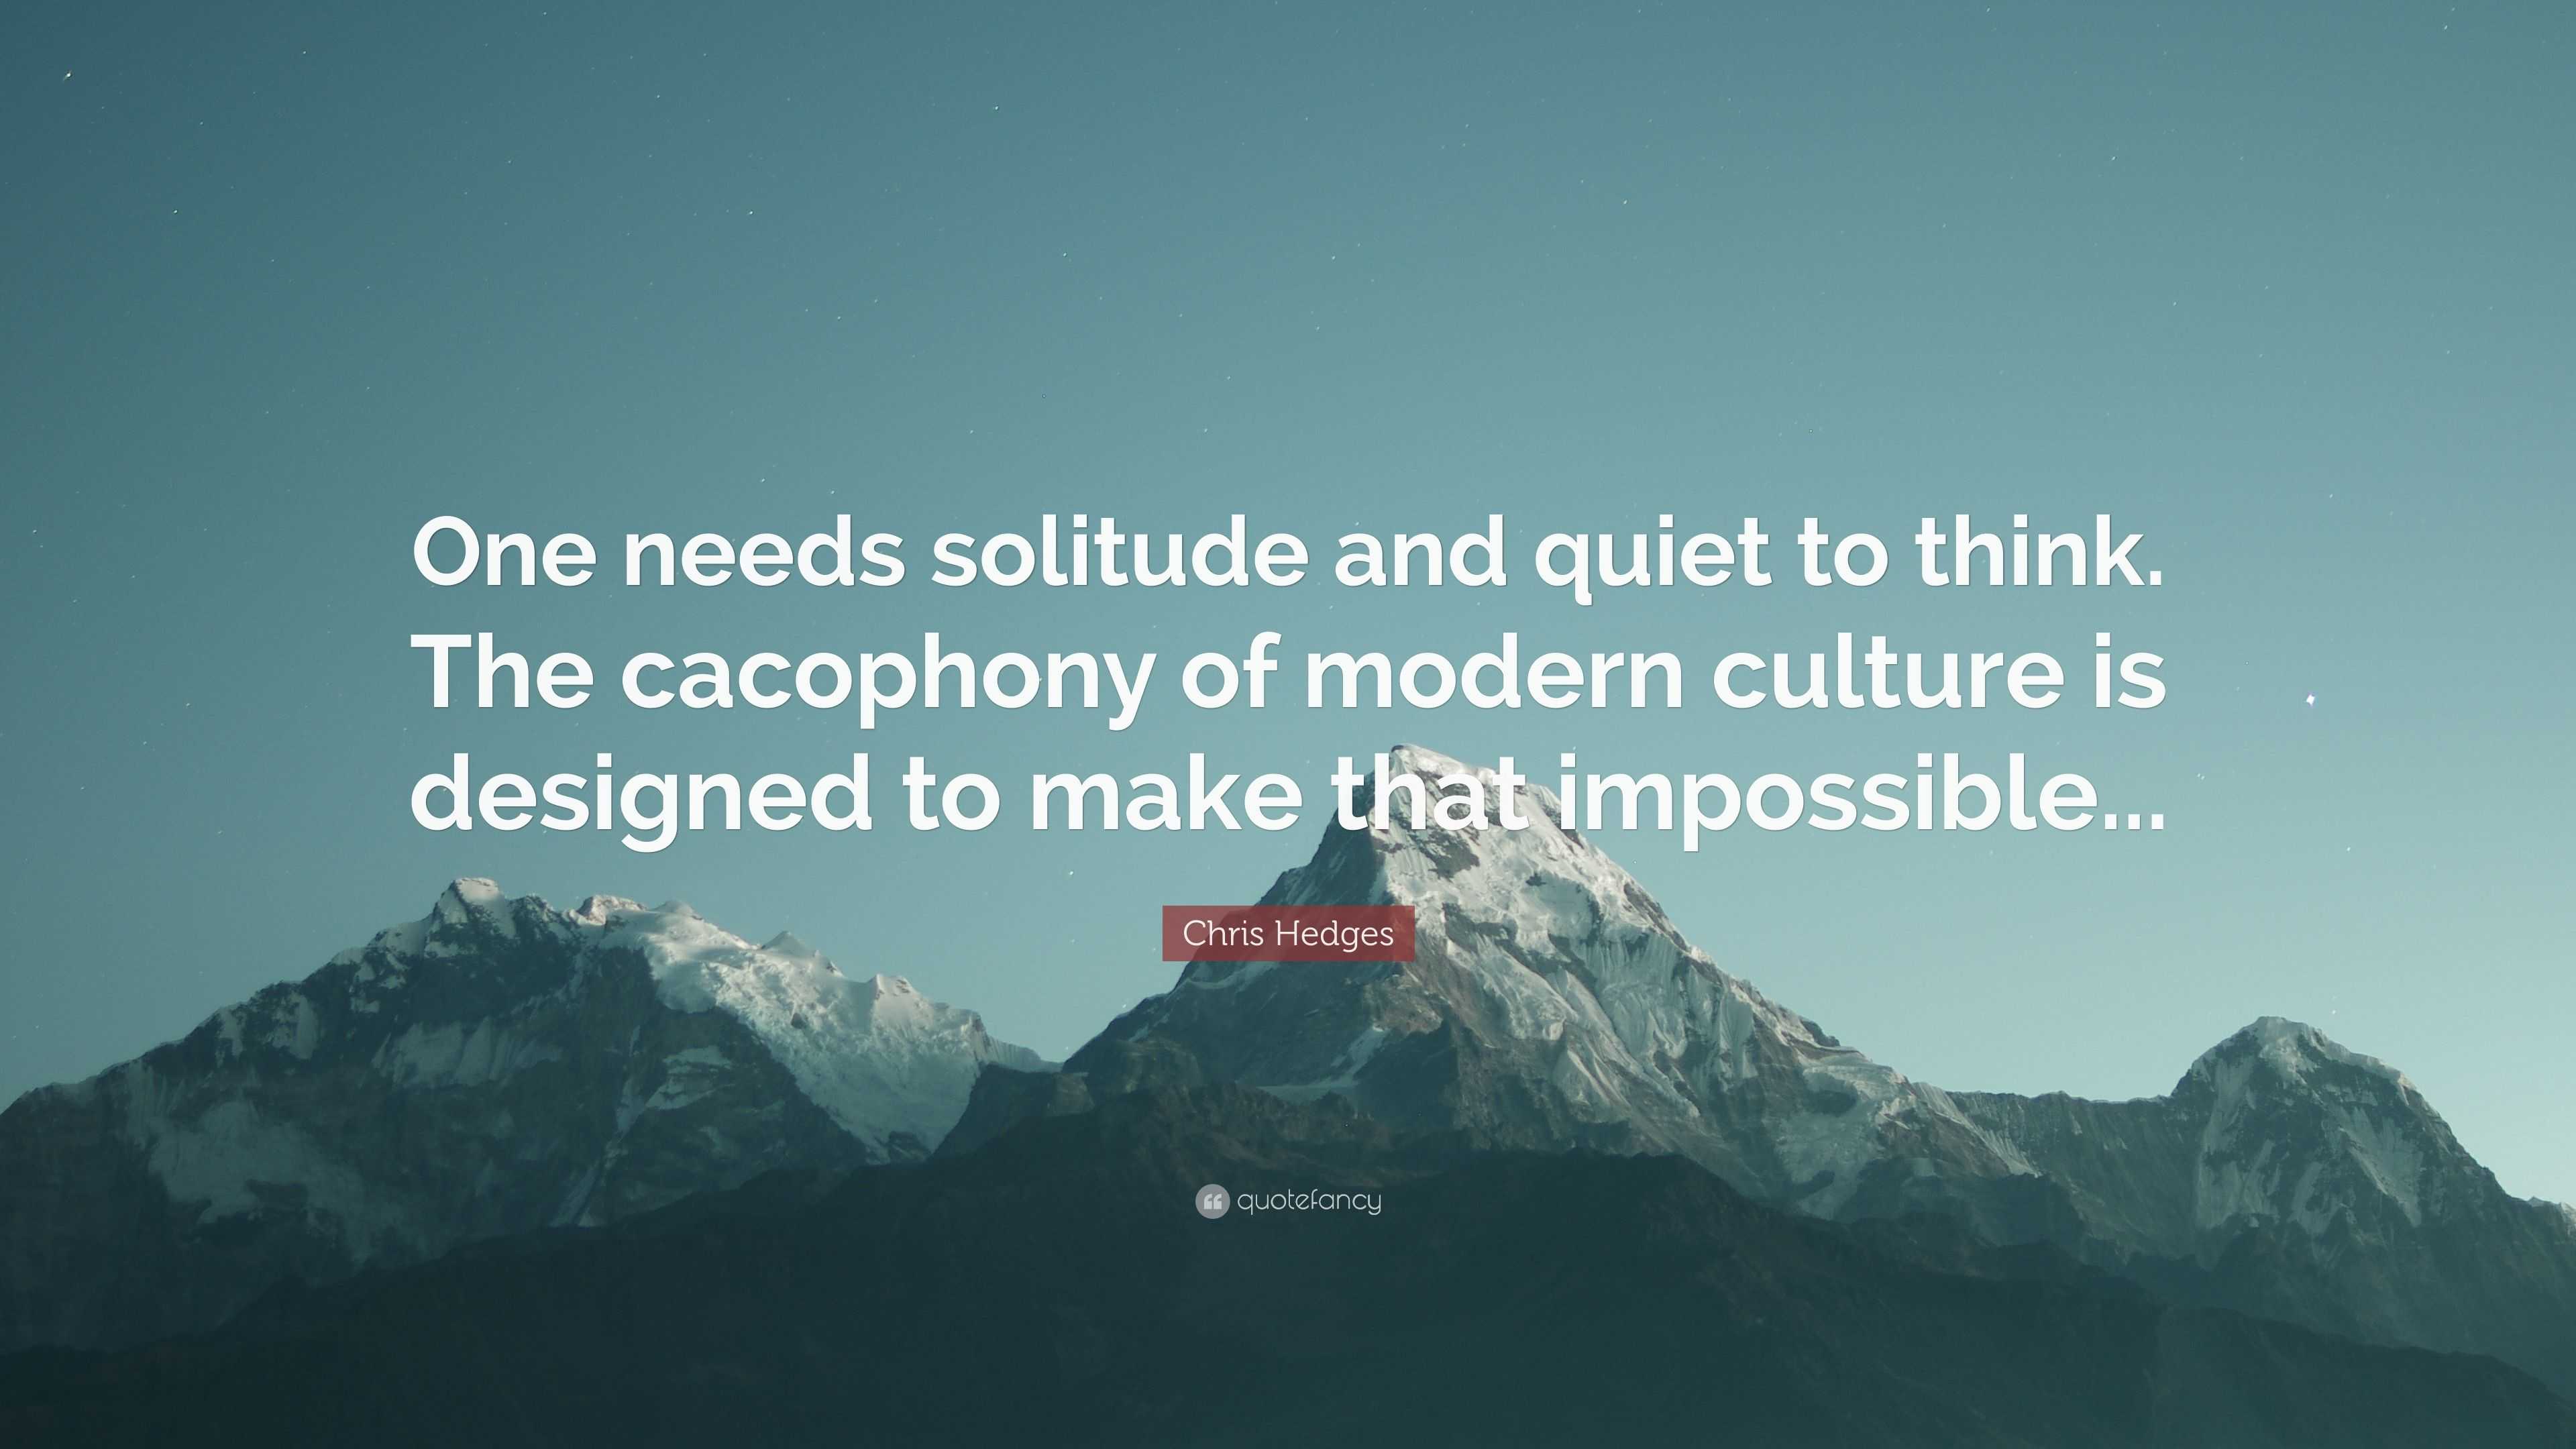 Chris Hedges Quote: “One needs solitude and quiet to think. The ...